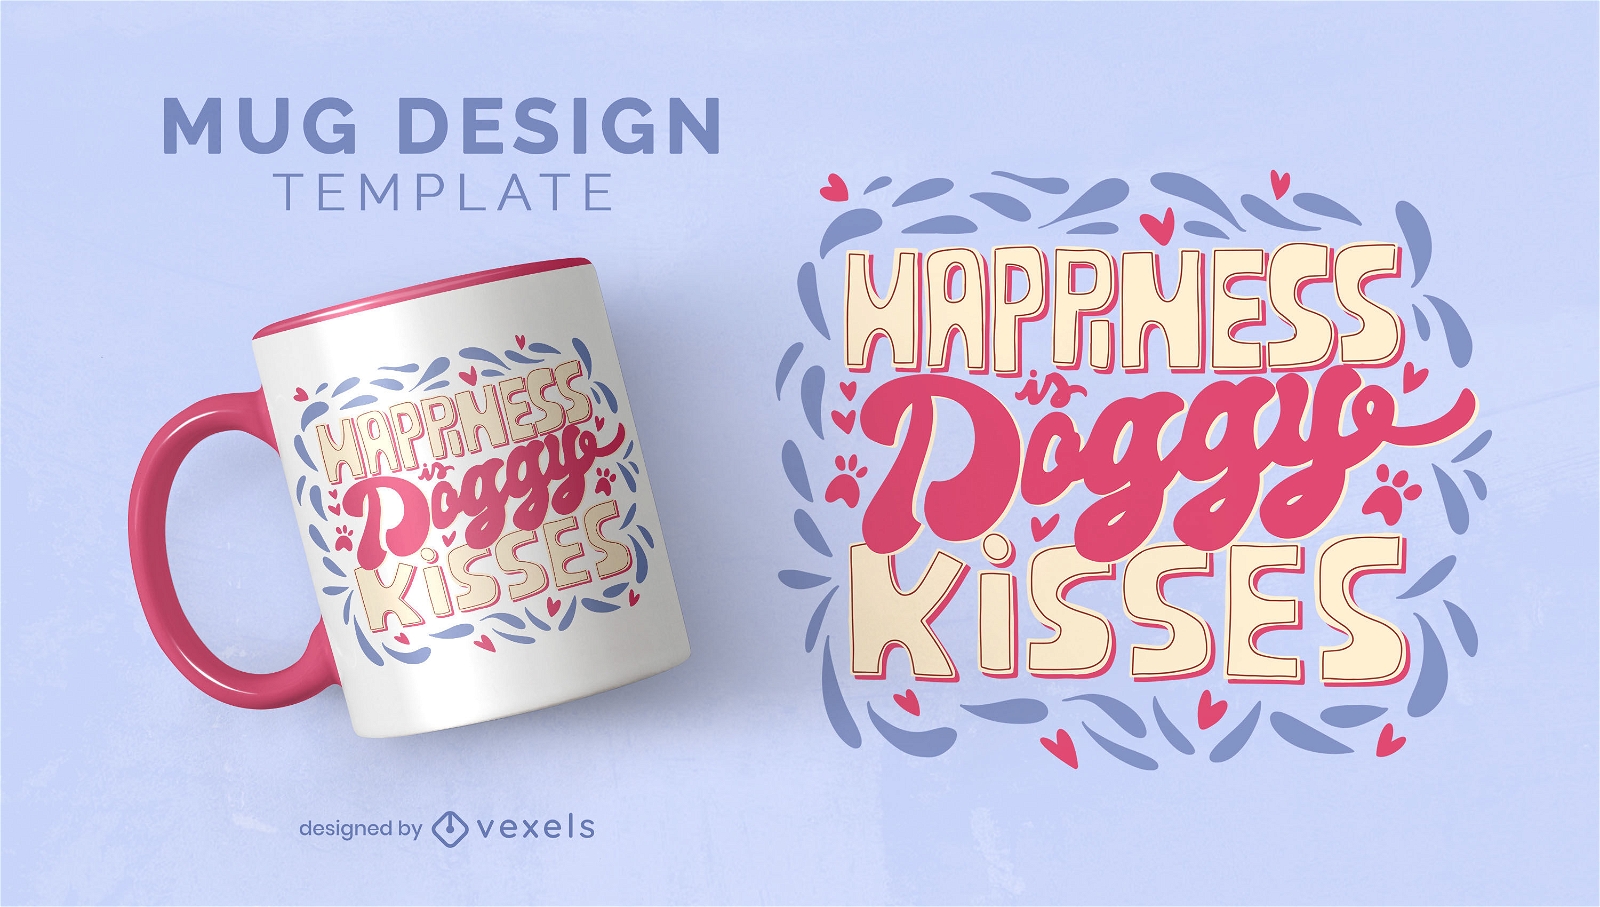 Doggy kisses happy quote mug template